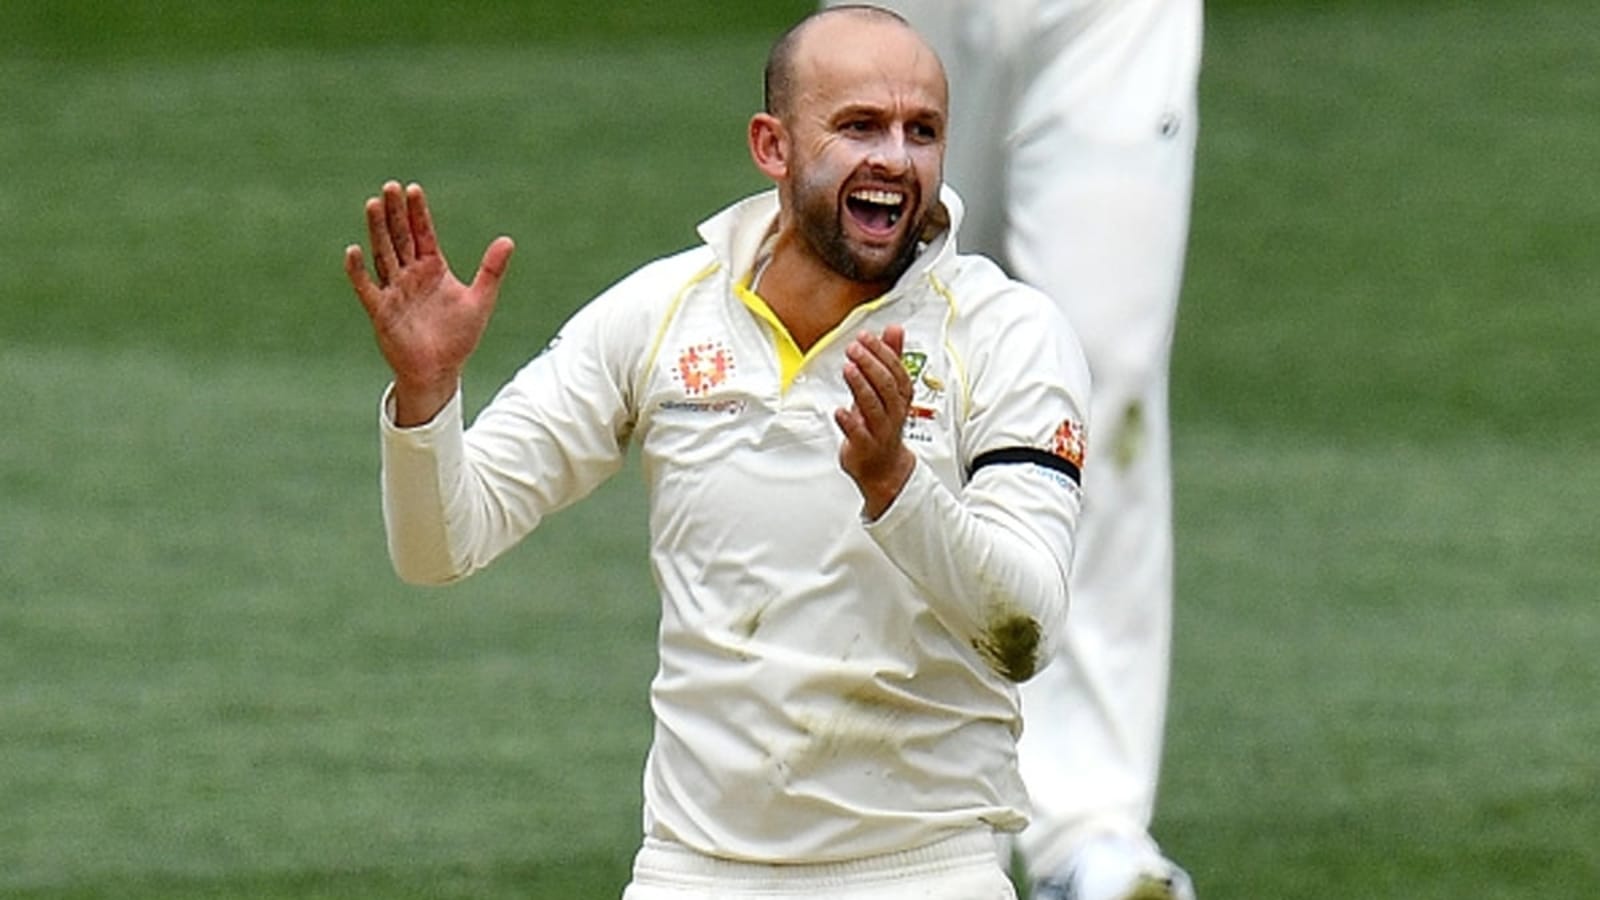 Australia's Test Results Without Nathan Lyon In Their Playing XI Since His Debut